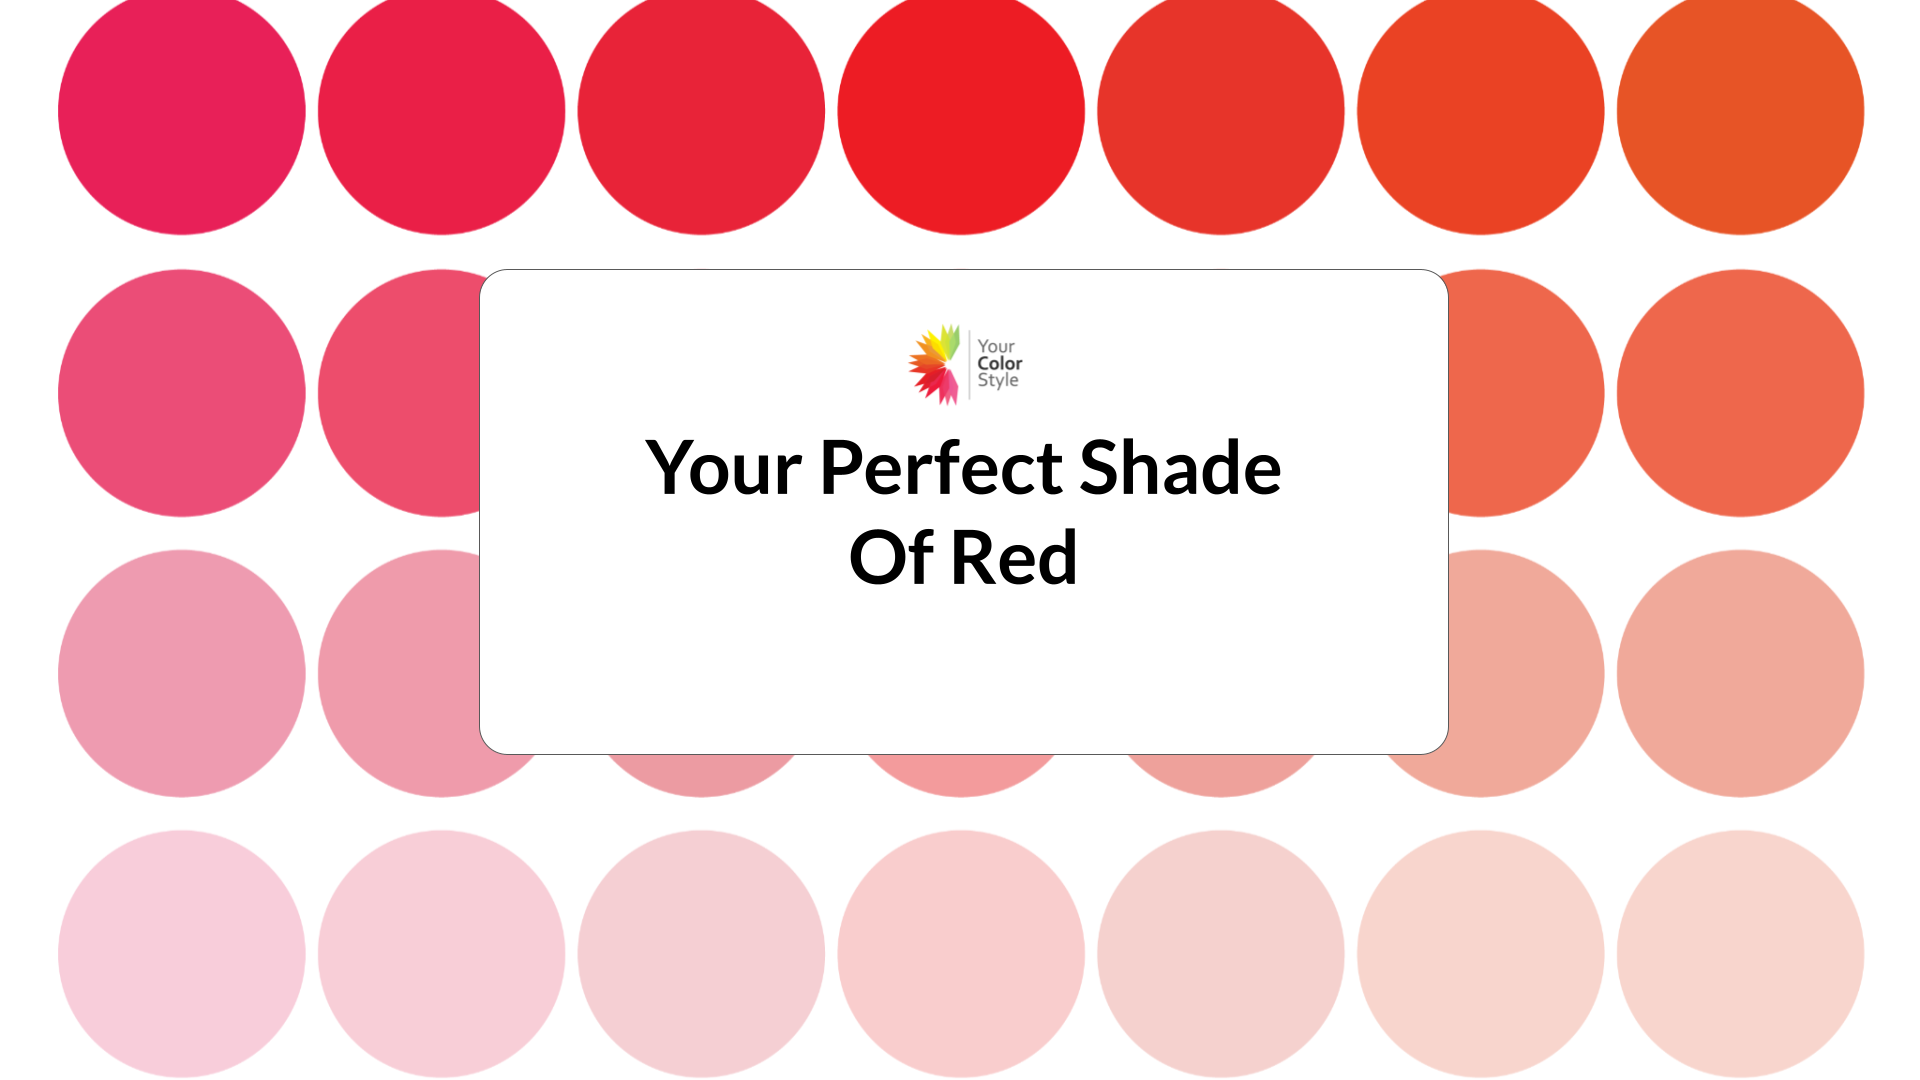 3 Pro Tips To Find Your Perfect Shade of Red For Valentine's Day